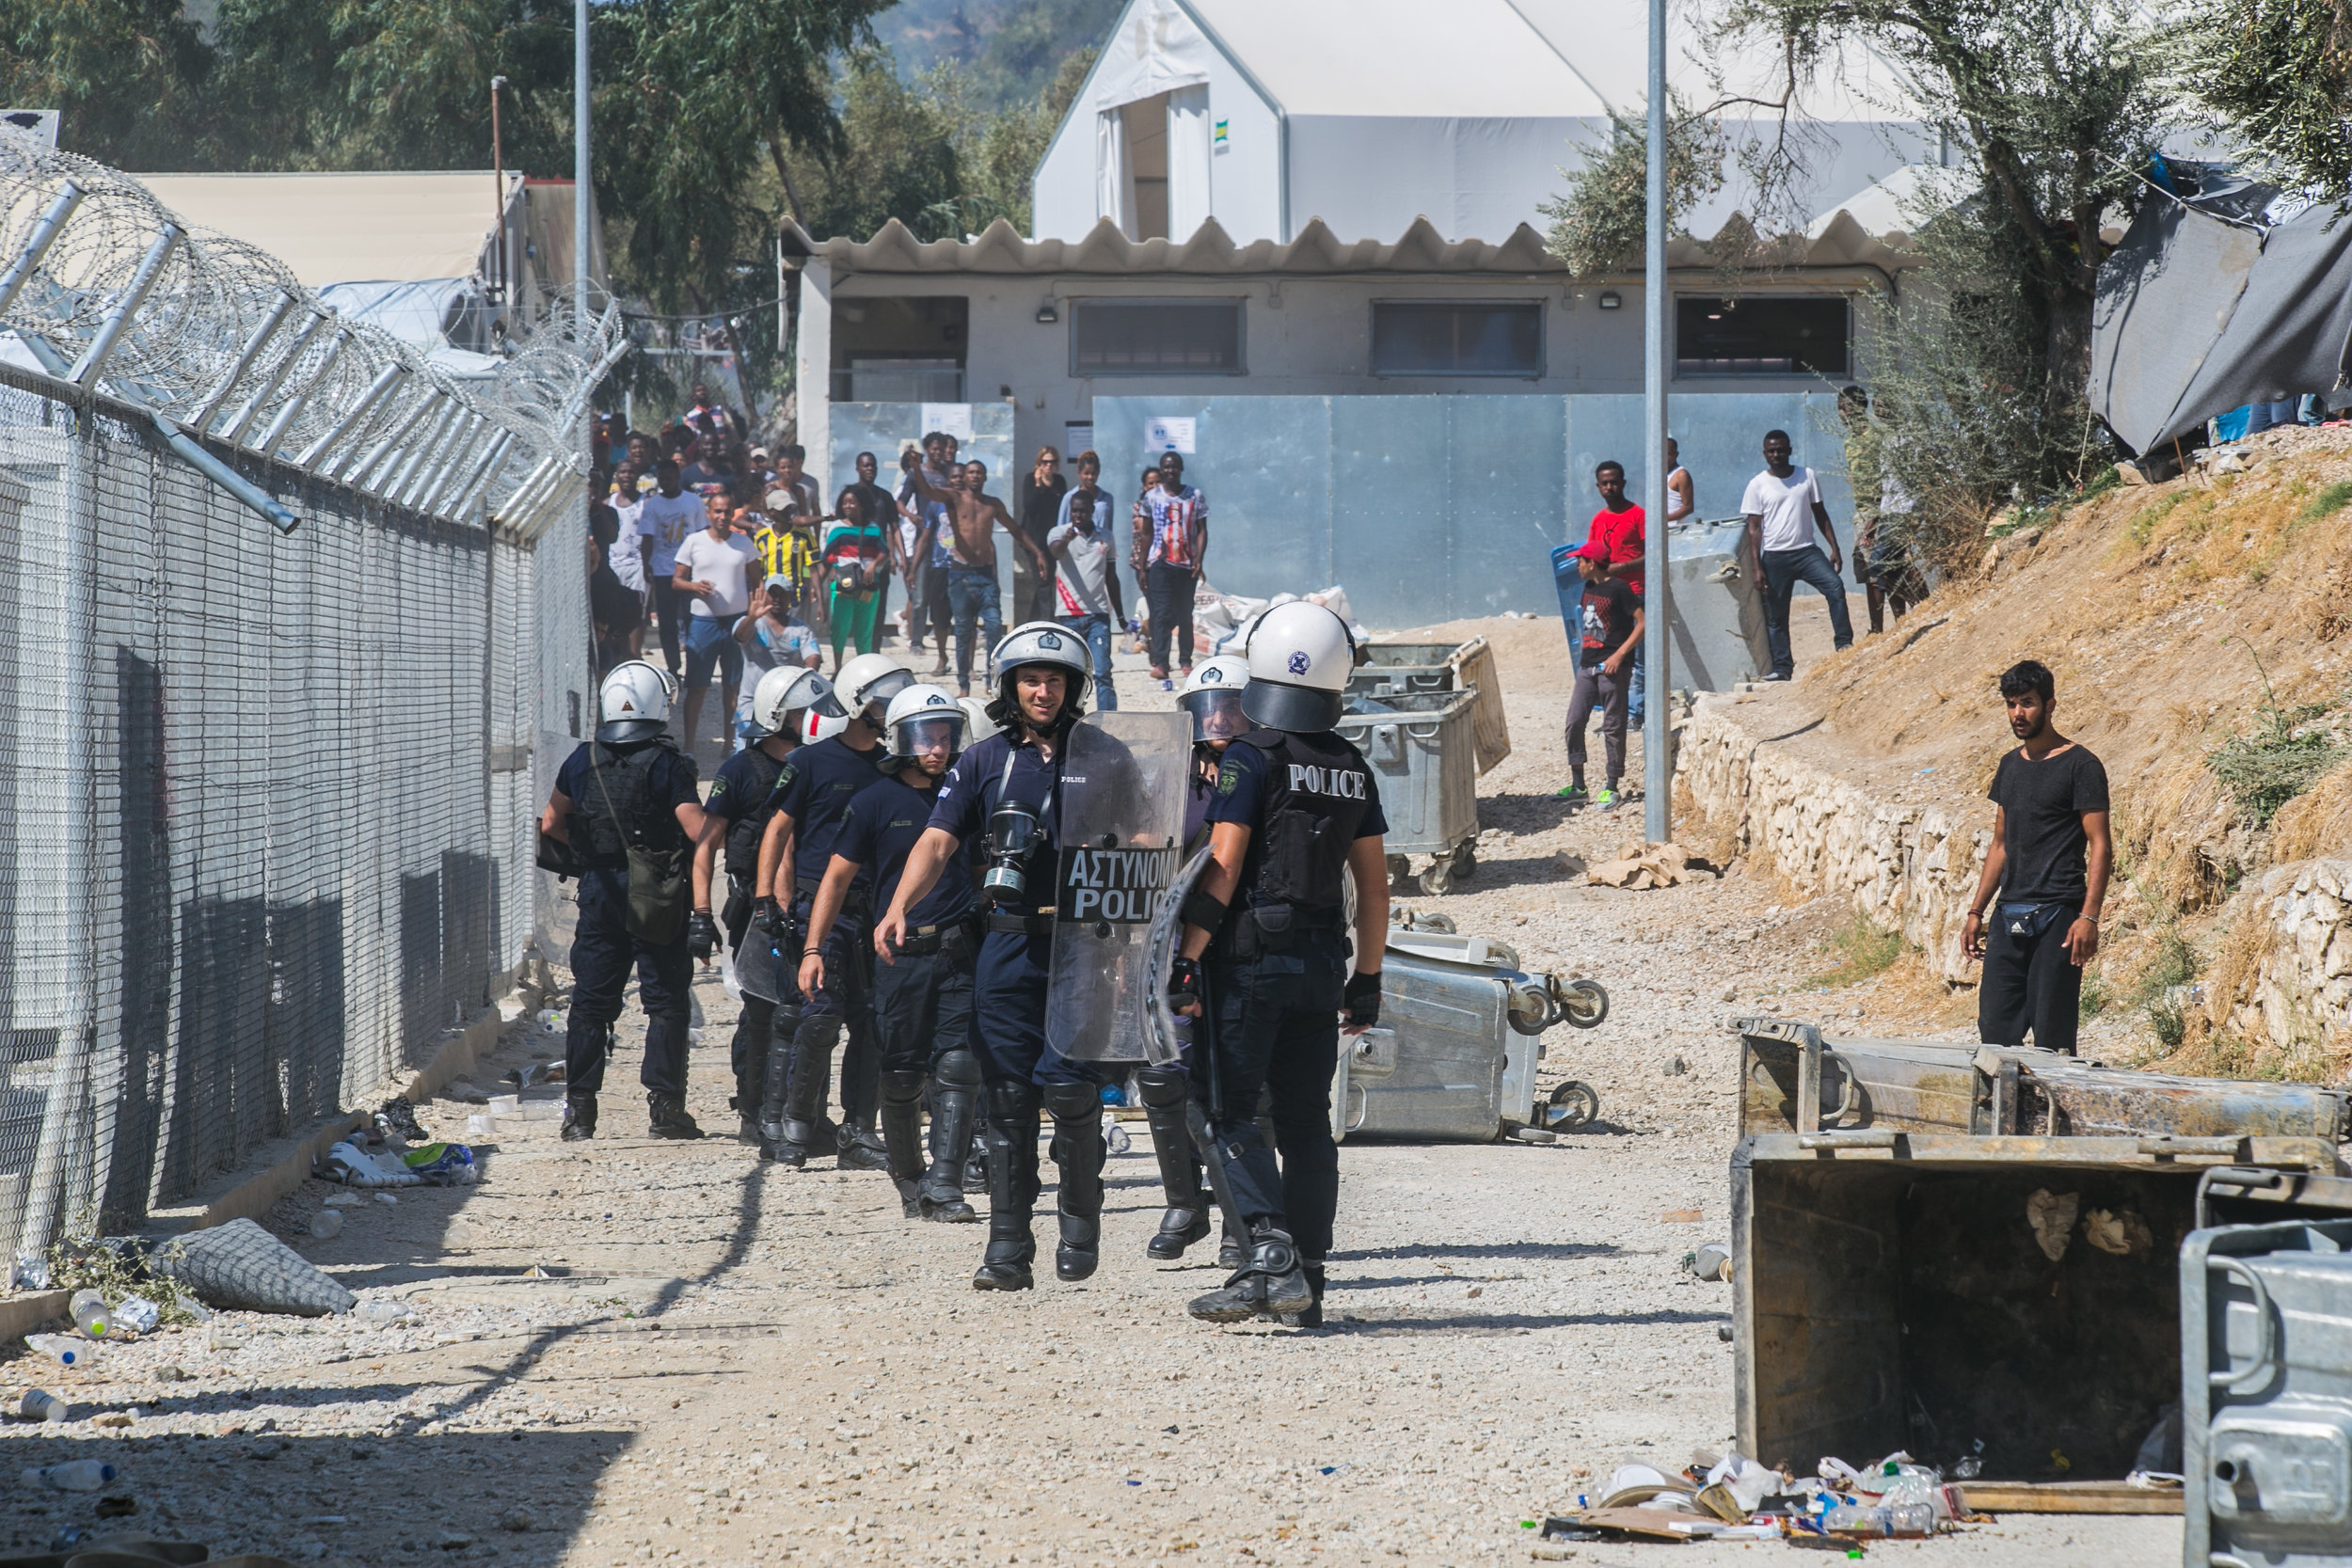  Riot police react as a crowd of Turkish and Syrian refugees begin to throw rocks outside the entrance to a camp in Moria, Lesvos. The riot began earlier this morning with refugees flipping dumpsters, lighting trash on fire, and taunting police. Afte